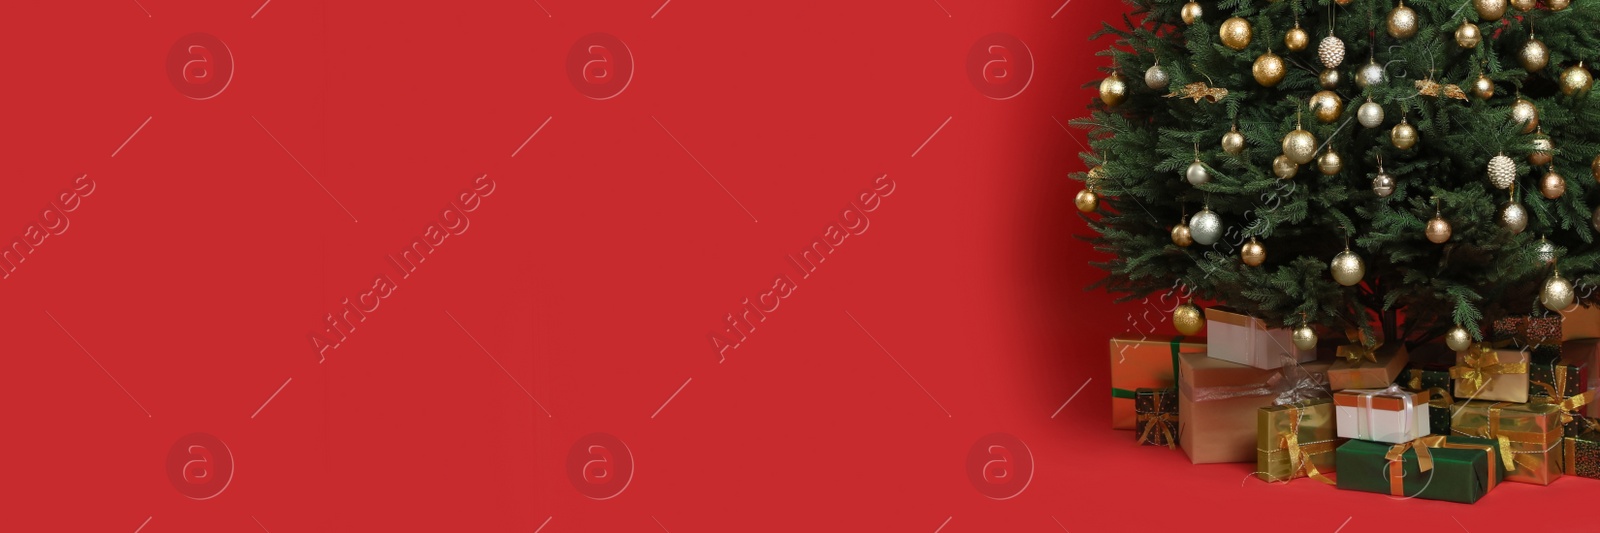 Image of Beautifully decorated Christmas tree and gift boxes on red background, space for text. Banner design